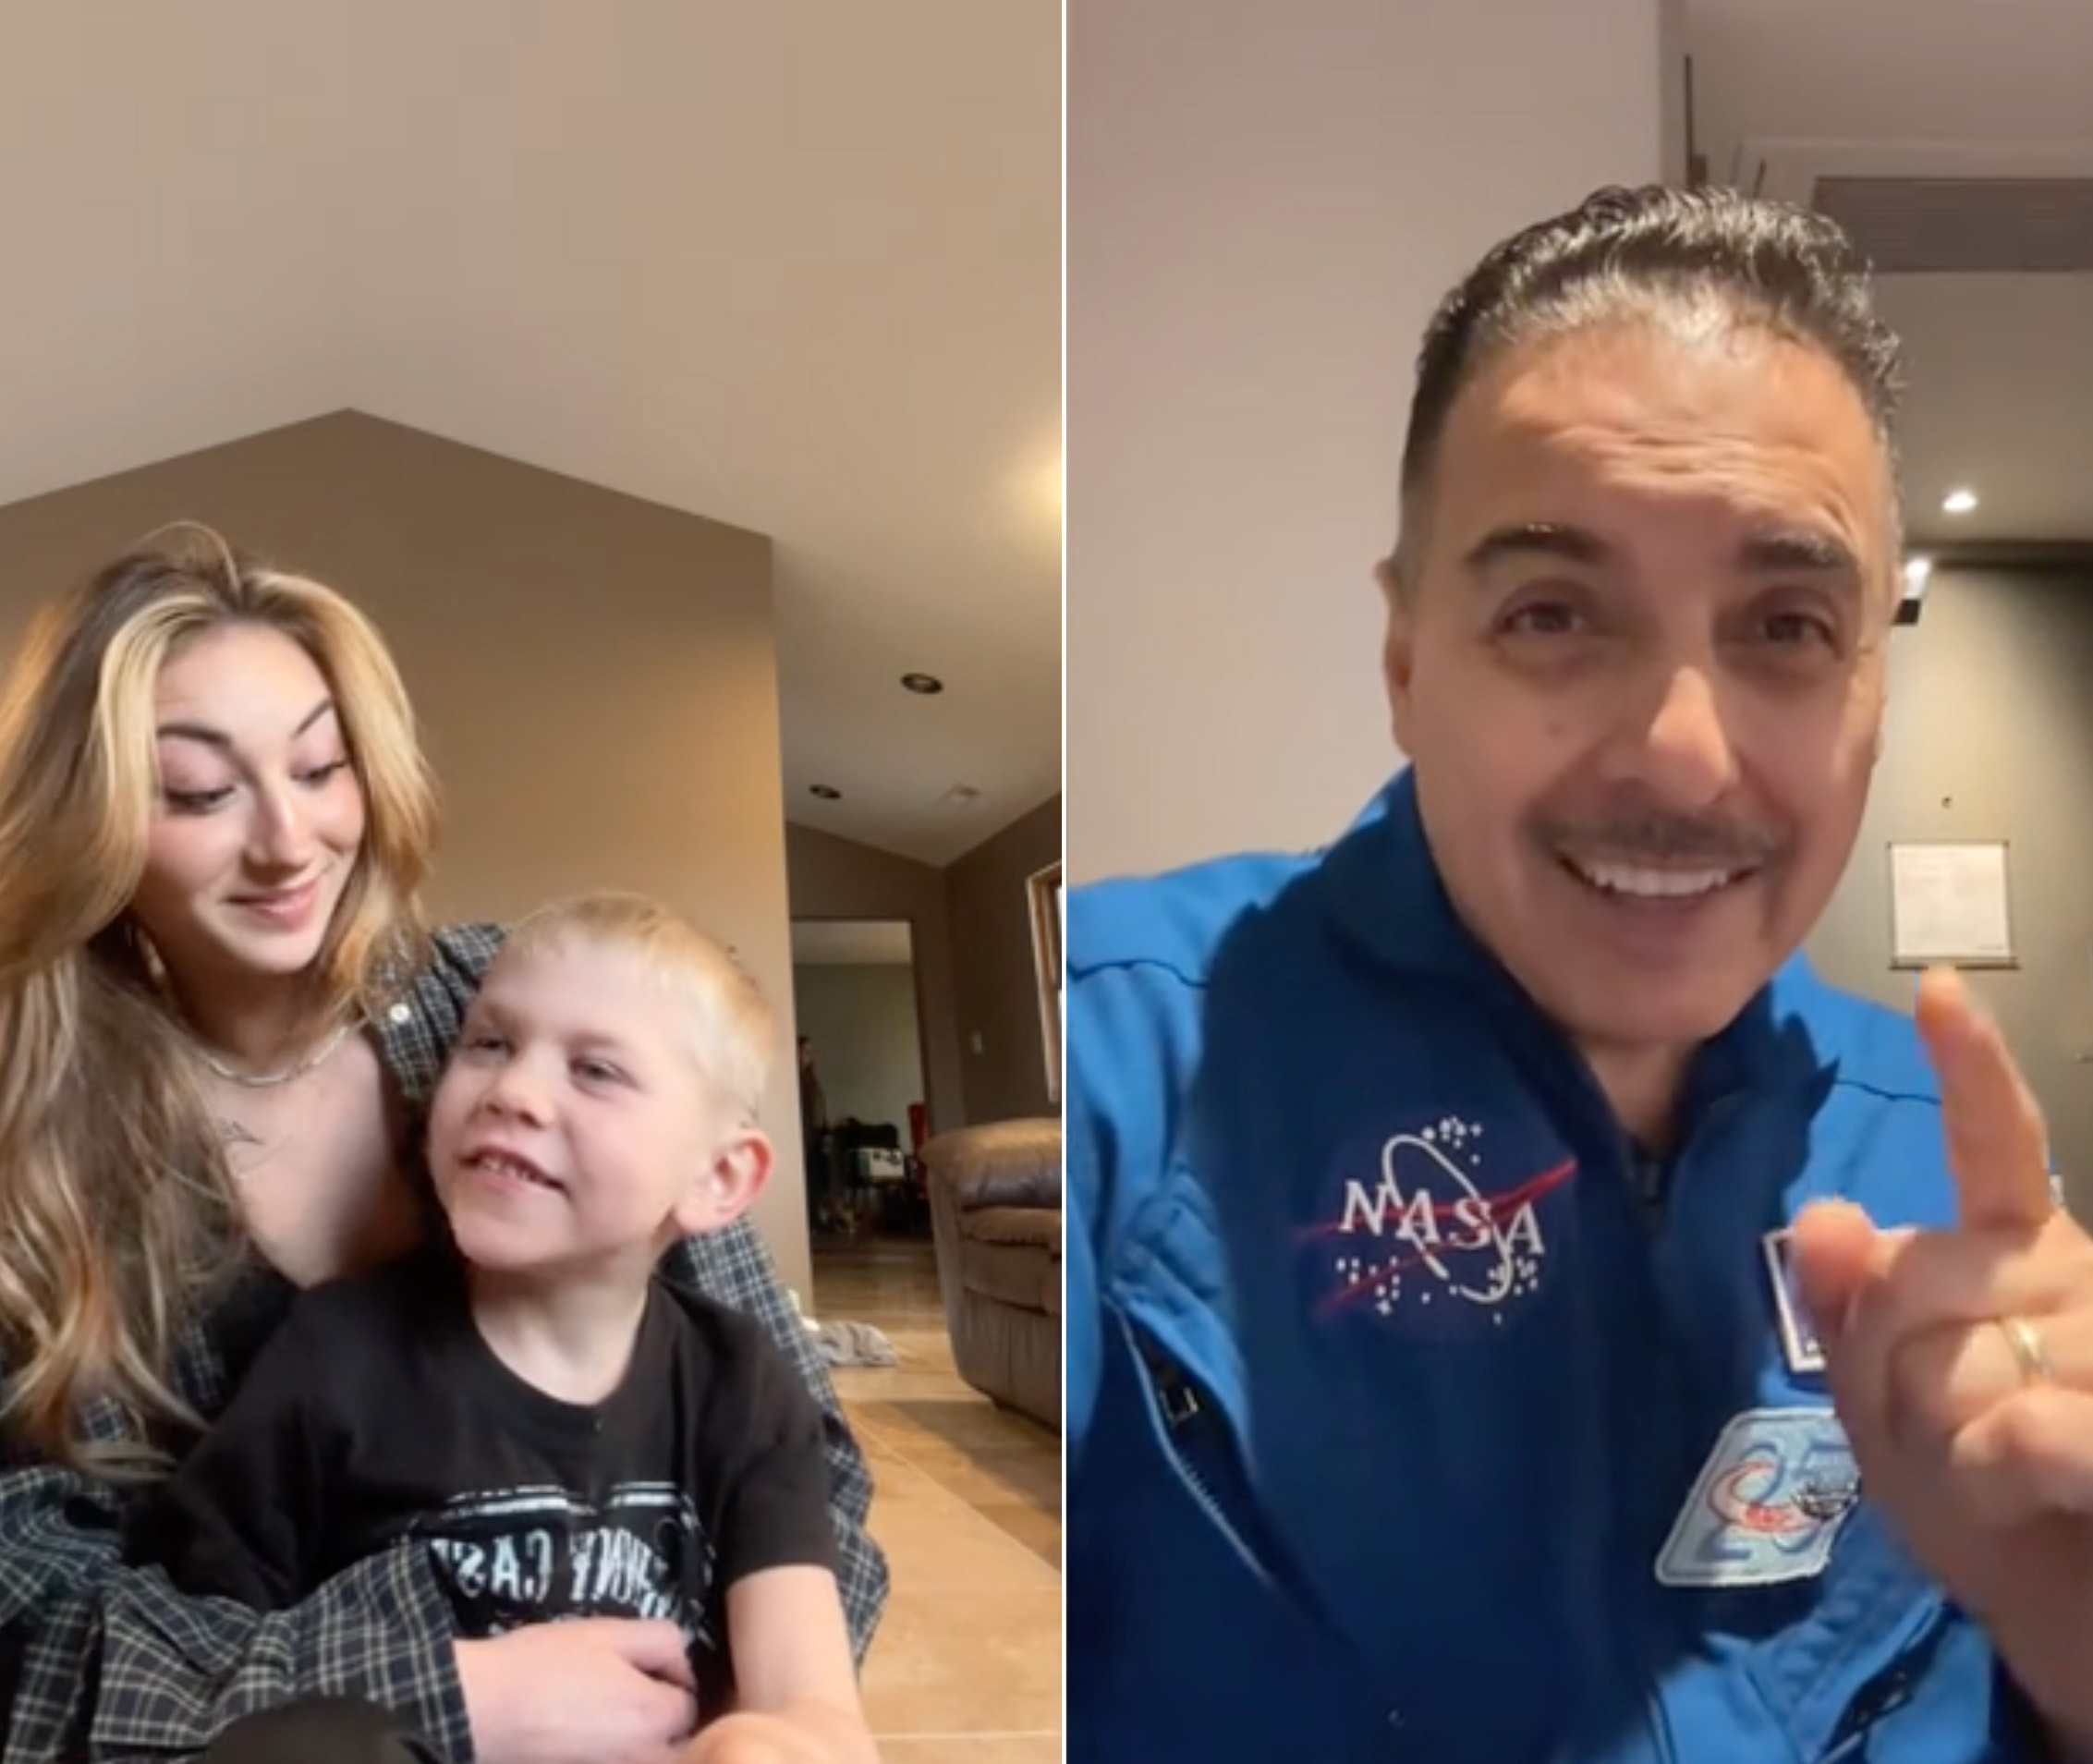 Sister Posted A Video About Her Bullied 6 Y.O. Brother, Received A Response From Astronaut